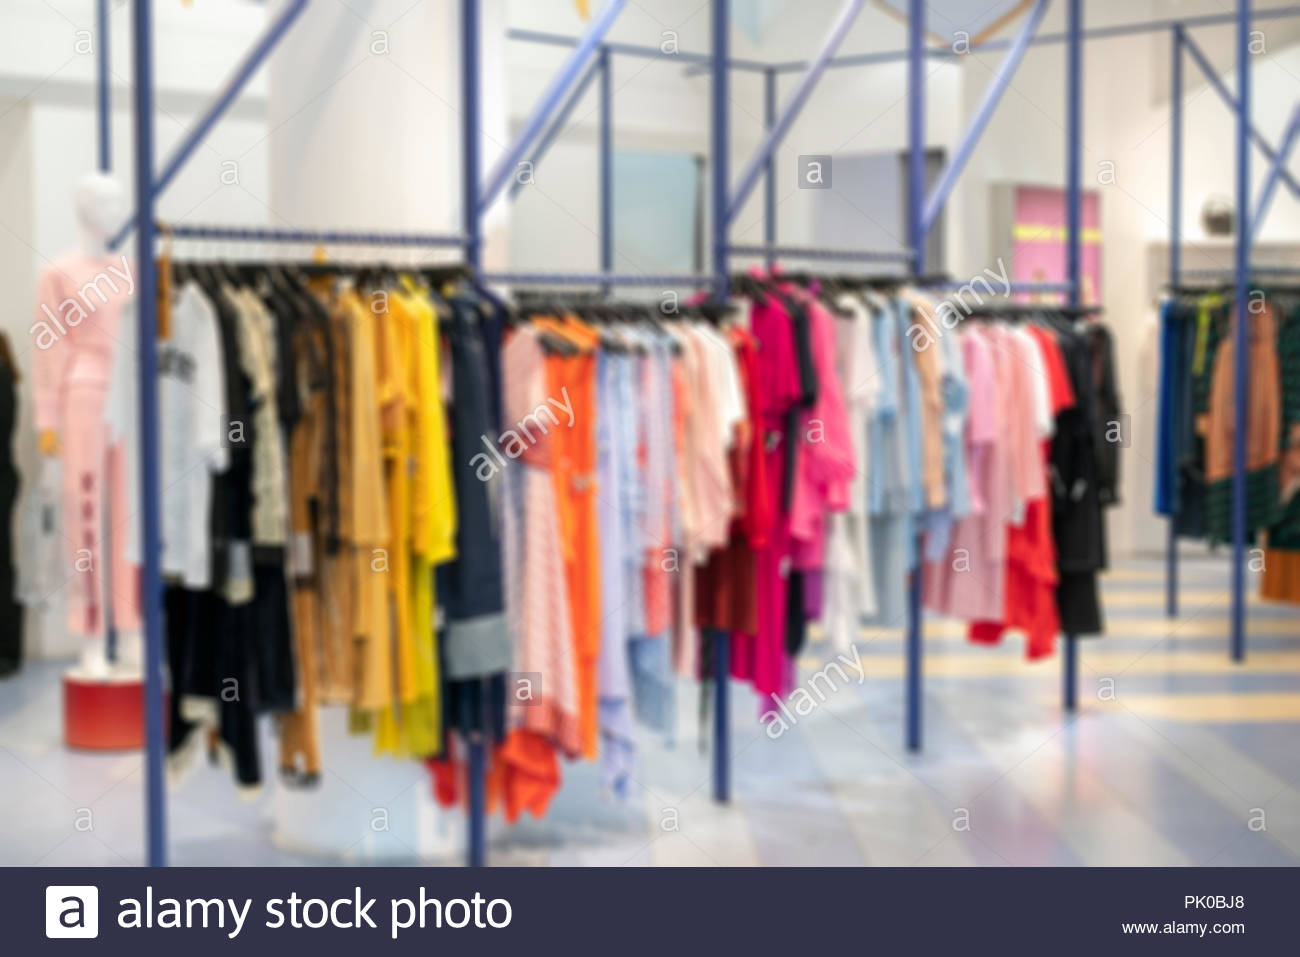 Background Blur Fashionable Clothes In A Boutique Store London